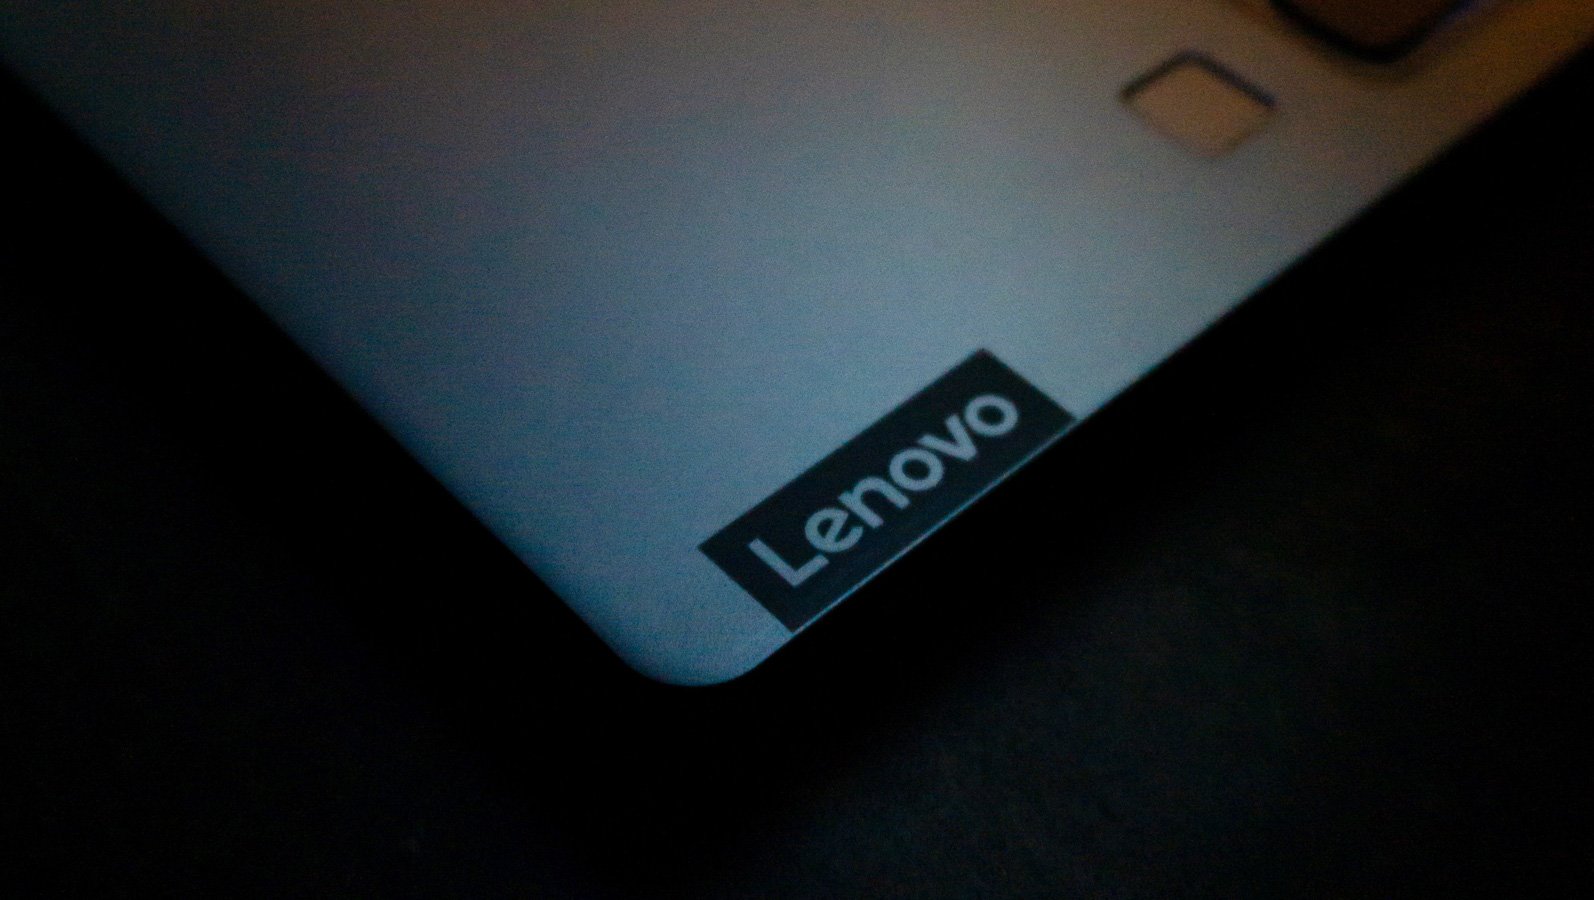 New Lenovo BIOS updates fix security bugs in hundreds of models